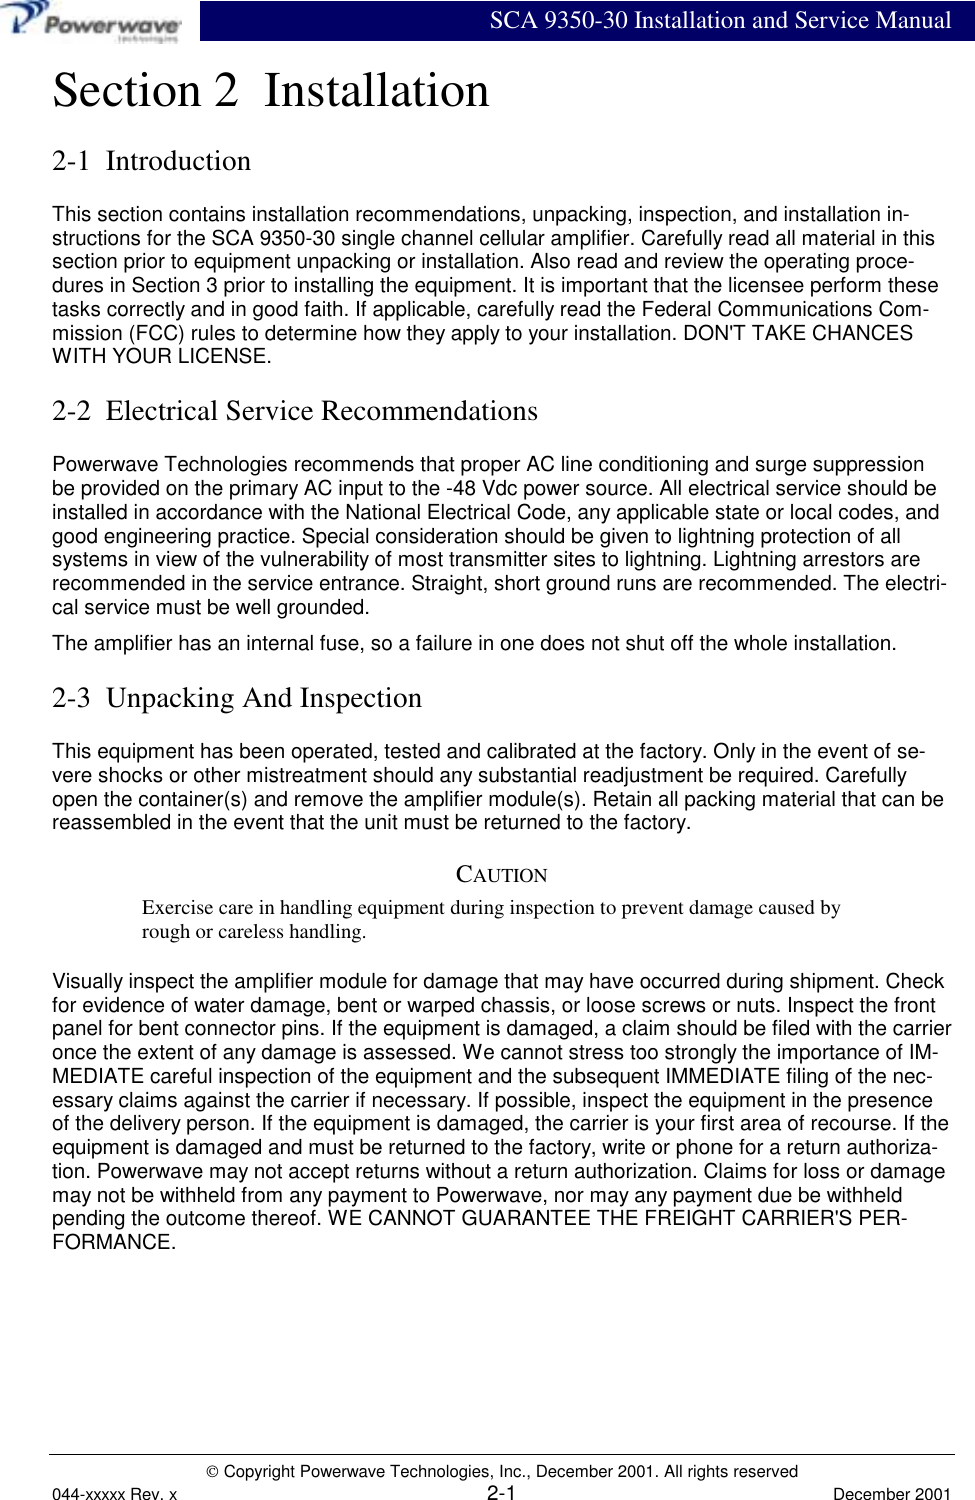 SCA 9350-30 Installation and Service Manual Copyright Powerwave Technologies, Inc., December 2001. All rights reserved044-xxxxx Rev. x 2-1 December 2001Section 2  Installation2-1  IntroductionThis section contains installation recommendations, unpacking, inspection, and installation in-structions for the SCA 9350-30 single channel cellular amplifier. Carefully read all material in thissection prior to equipment unpacking or installation. Also read and review the operating proce-dures in Section 3 prior to installing the equipment. It is important that the licensee perform thesetasks correctly and in good faith. If applicable, carefully read the Federal Communications Com-mission (FCC) rules to determine how they apply to your installation. DON&apos;T TAKE CHANCESWITH YOUR LICENSE.2-2  Electrical Service RecommendationsPowerwave Technologies recommends that proper AC line conditioning and surge suppressionbe provided on the primary AC input to the -48 Vdc power source. All electrical service should beinstalled in accordance with the National Electrical Code, any applicable state or local codes, andgood engineering practice. Special consideration should be given to lightning protection of allsystems in view of the vulnerability of most transmitter sites to lightning. Lightning arrestors arerecommended in the service entrance. Straight, short ground runs are recommended. The electri-cal service must be well grounded.The amplifier has an internal fuse, so a failure in one does not shut off the whole installation.2-3  Unpacking And InspectionThis equipment has been operated, tested and calibrated at the factory. Only in the event of se-vere shocks or other mistreatment should any substantial readjustment be required. Carefullyopen the container(s) and remove the amplifier module(s). Retain all packing material that can bereassembled in the event that the unit must be returned to the factory.CAUTIONExercise care in handling equipment during inspection to prevent damage caused byrough or careless handling.Visually inspect the amplifier module for damage that may have occurred during shipment. Checkfor evidence of water damage, bent or warped chassis, or loose screws or nuts. Inspect the frontpanel for bent connector pins. If the equipment is damaged, a claim should be filed with the carrieronce the extent of any damage is assessed. We cannot stress too strongly the importance of IM-MEDIATE careful inspection of the equipment and the subsequent IMMEDIATE filing of the nec-essary claims against the carrier if necessary. If possible, inspect the equipment in the presenceof the delivery person. If the equipment is damaged, the carrier is your first area of recourse. If theequipment is damaged and must be returned to the factory, write or phone for a return authoriza-tion. Powerwave may not accept returns without a return authorization. Claims for loss or damagemay not be withheld from any payment to Powerwave, nor may any payment due be withheldpending the outcome thereof. WE CANNOT GUARANTEE THE FREIGHT CARRIER&apos;S PER-FORMANCE.